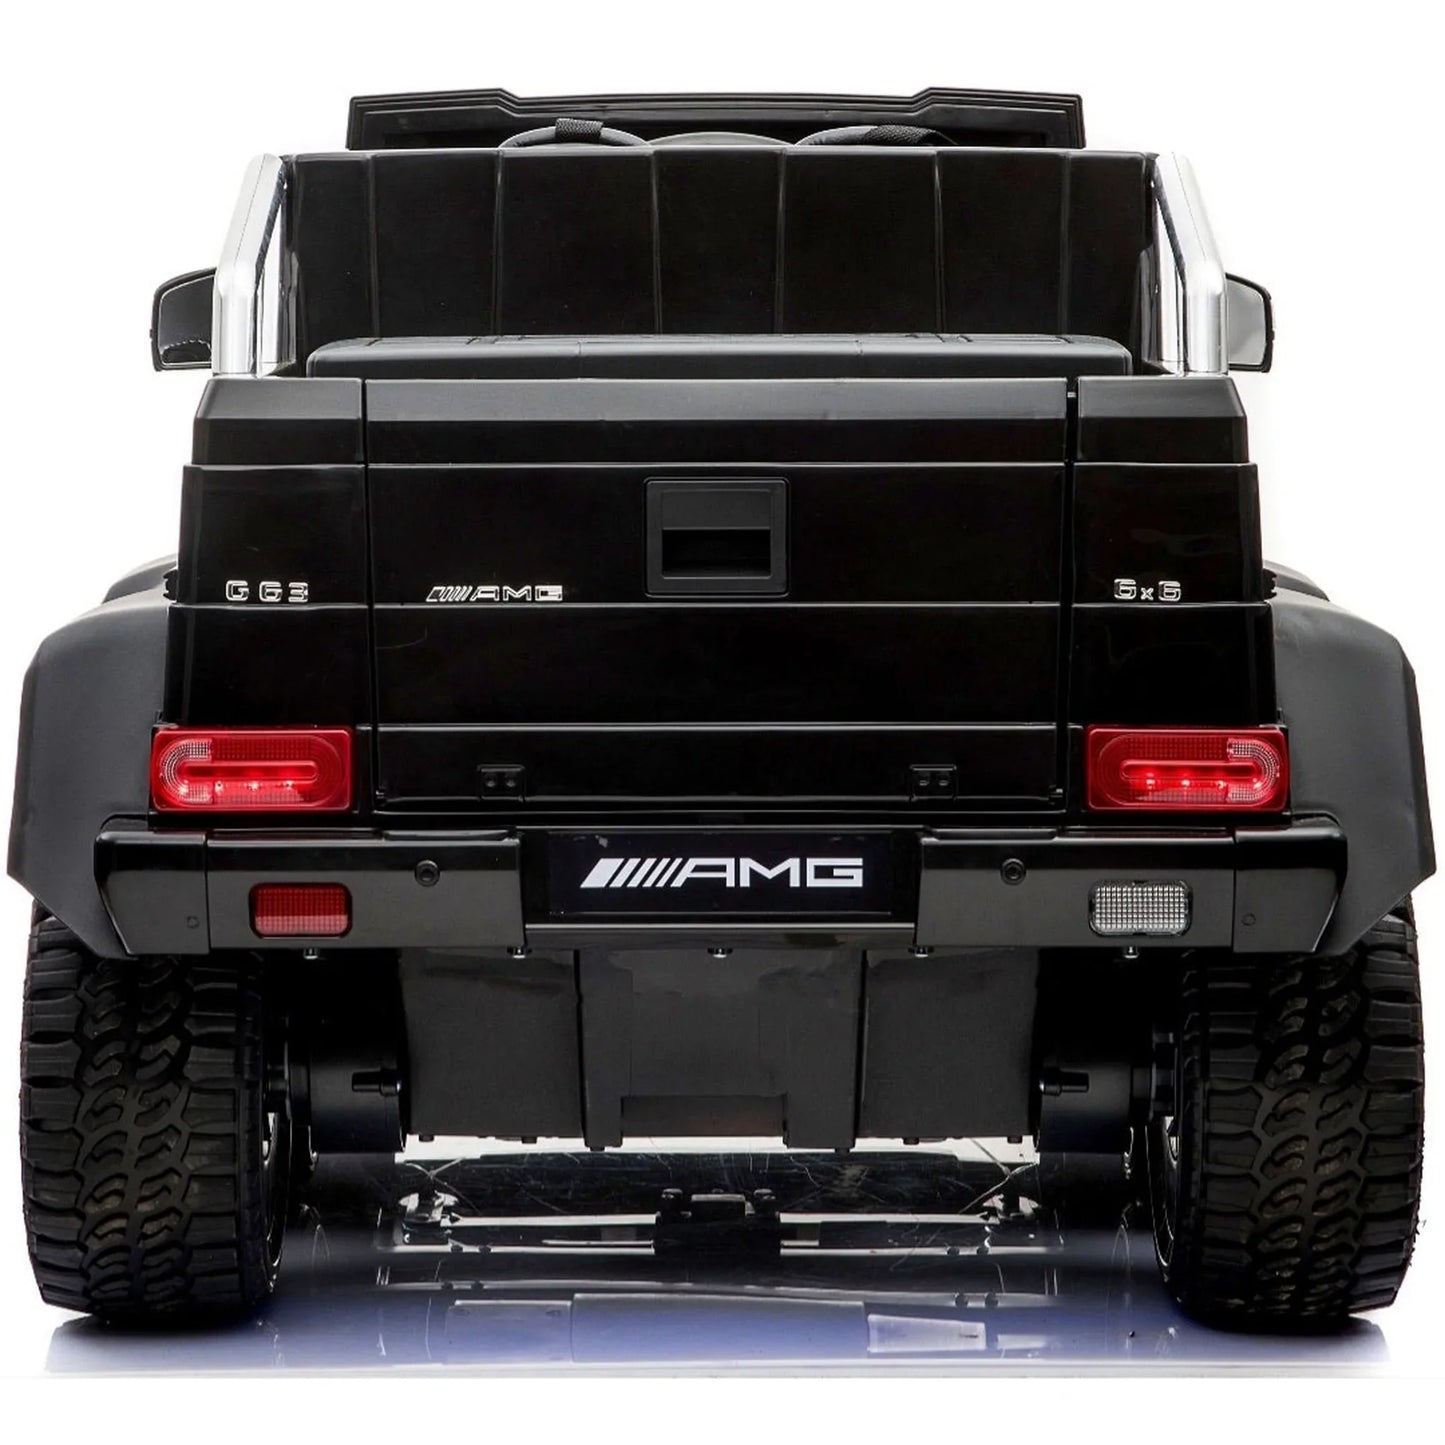 Rear view of black Mercedes G65 Children's Electric Ride-On Jeep with distinctive tail lights and badging